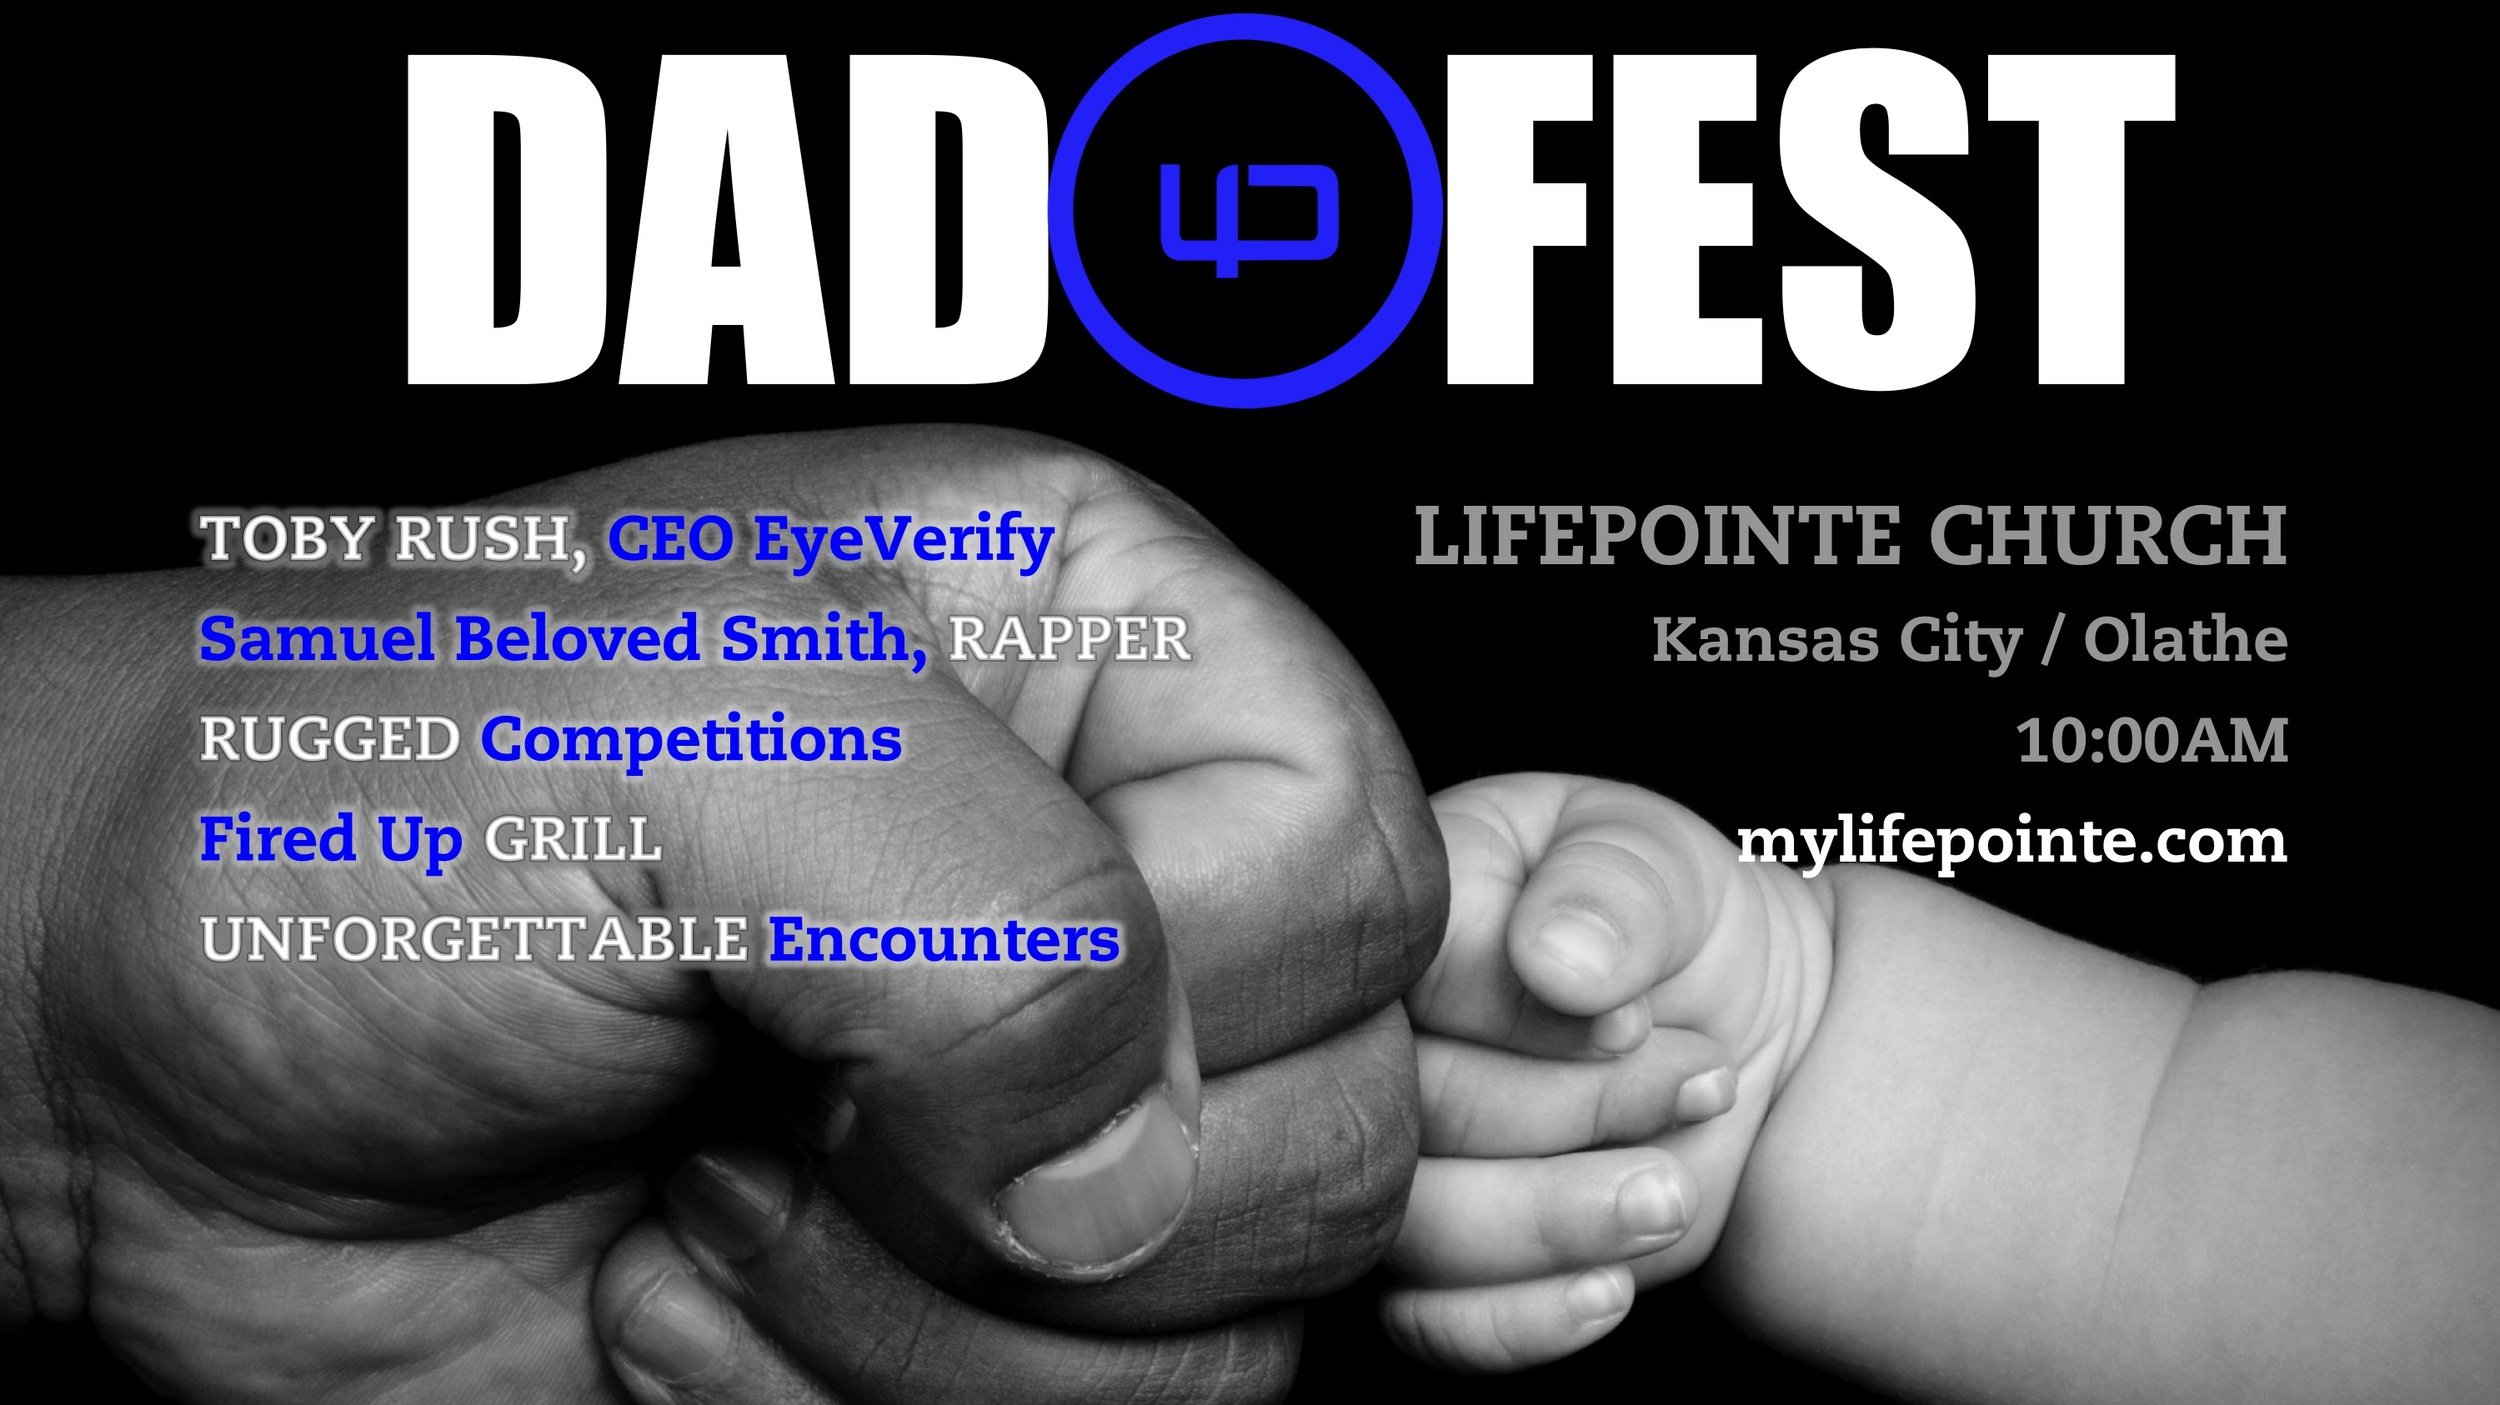 Dad Fest 2015 - Father's Day